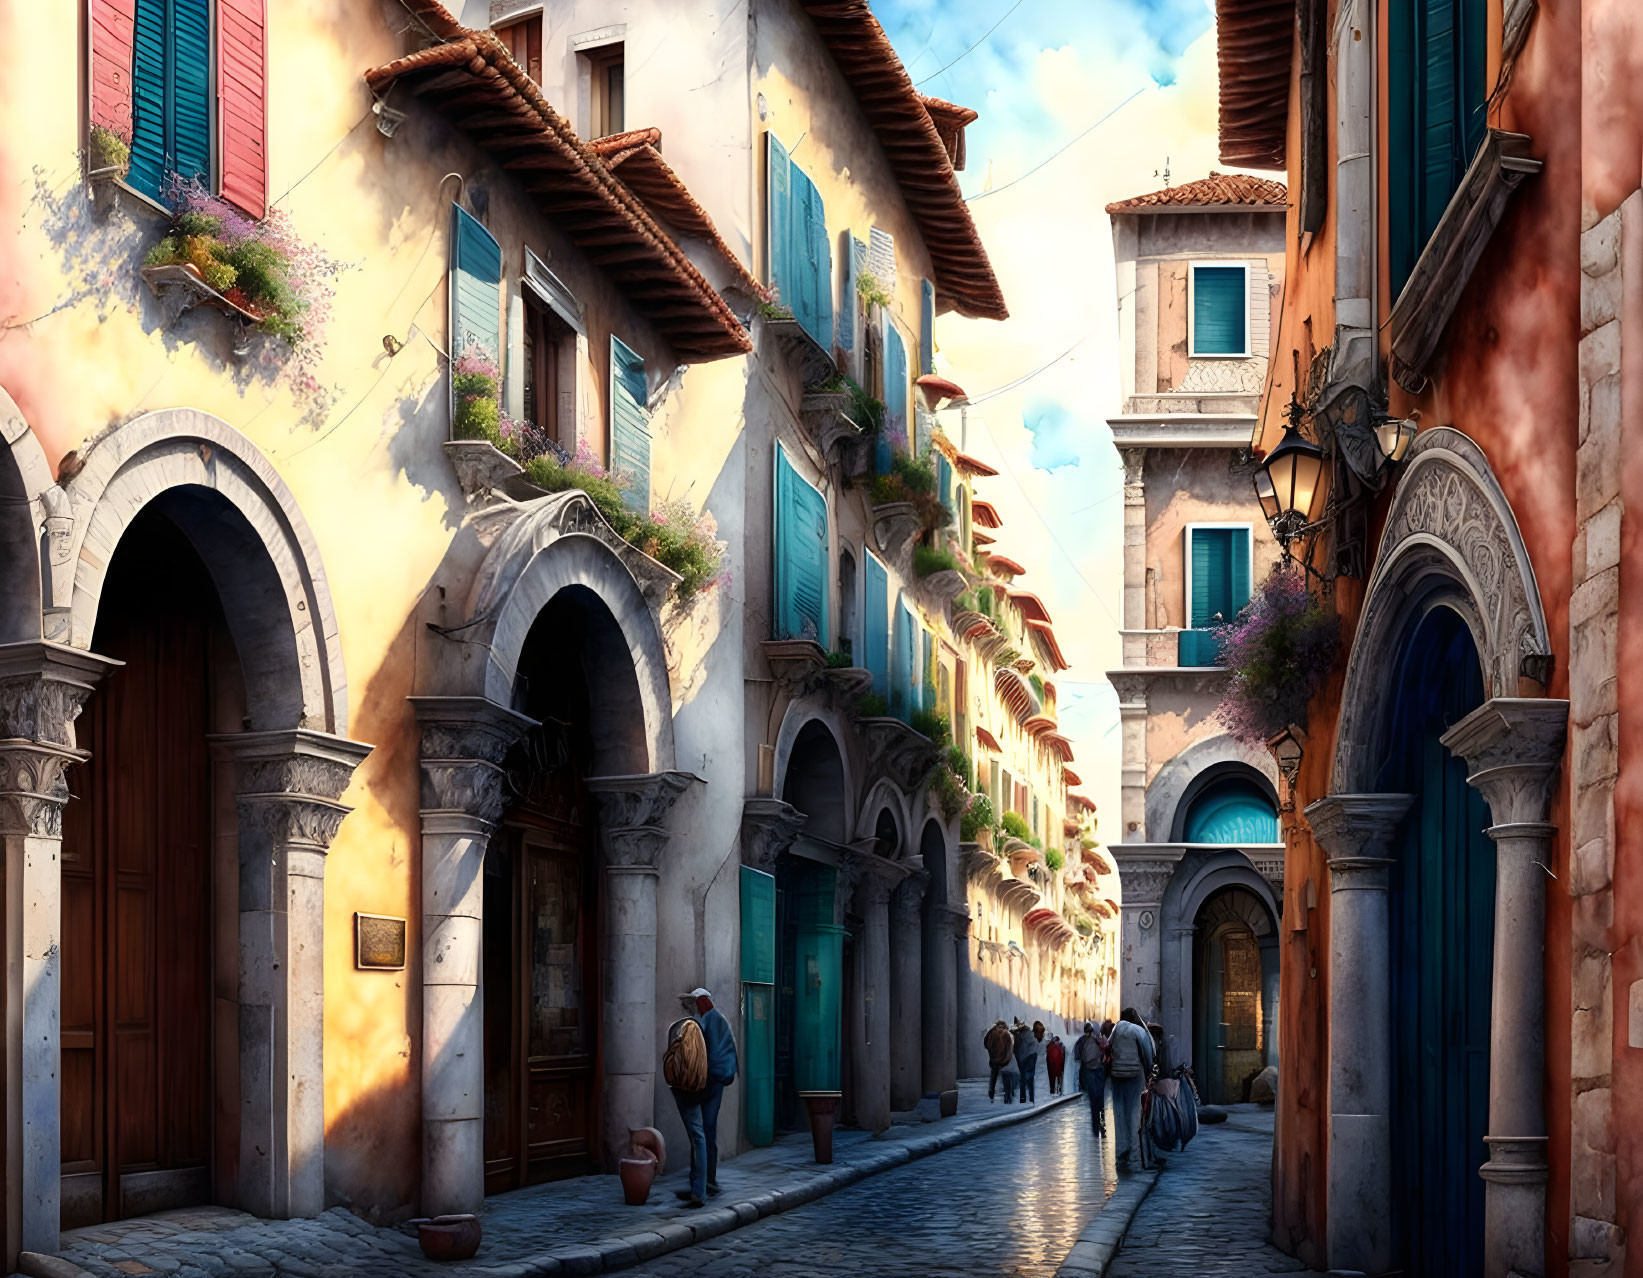 Traditional European architecture on picturesque narrow street with arched doorways, balconies, and people.